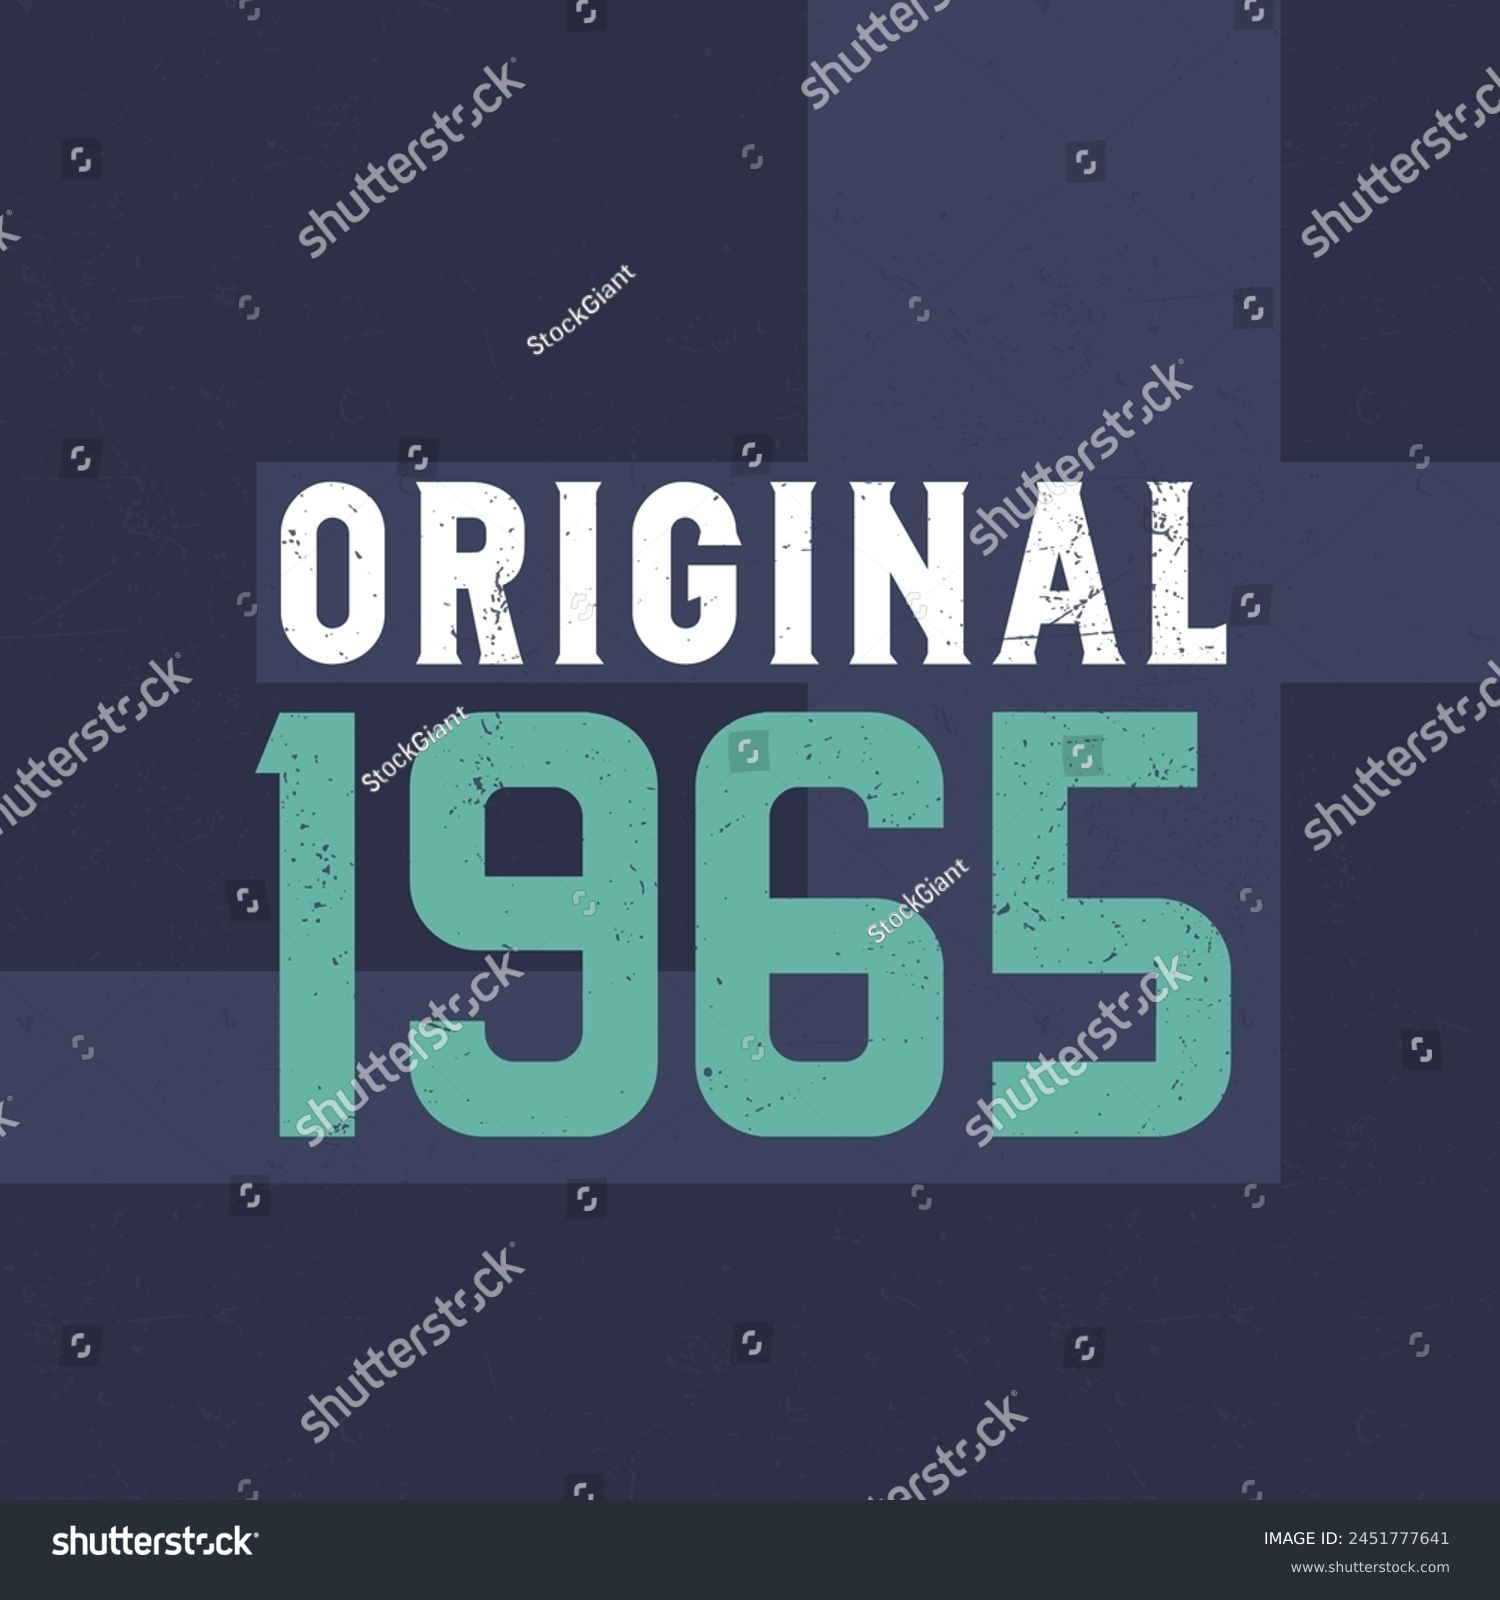 SVG of Original 1965. Birthday celebration for those born in the year 1965 svg